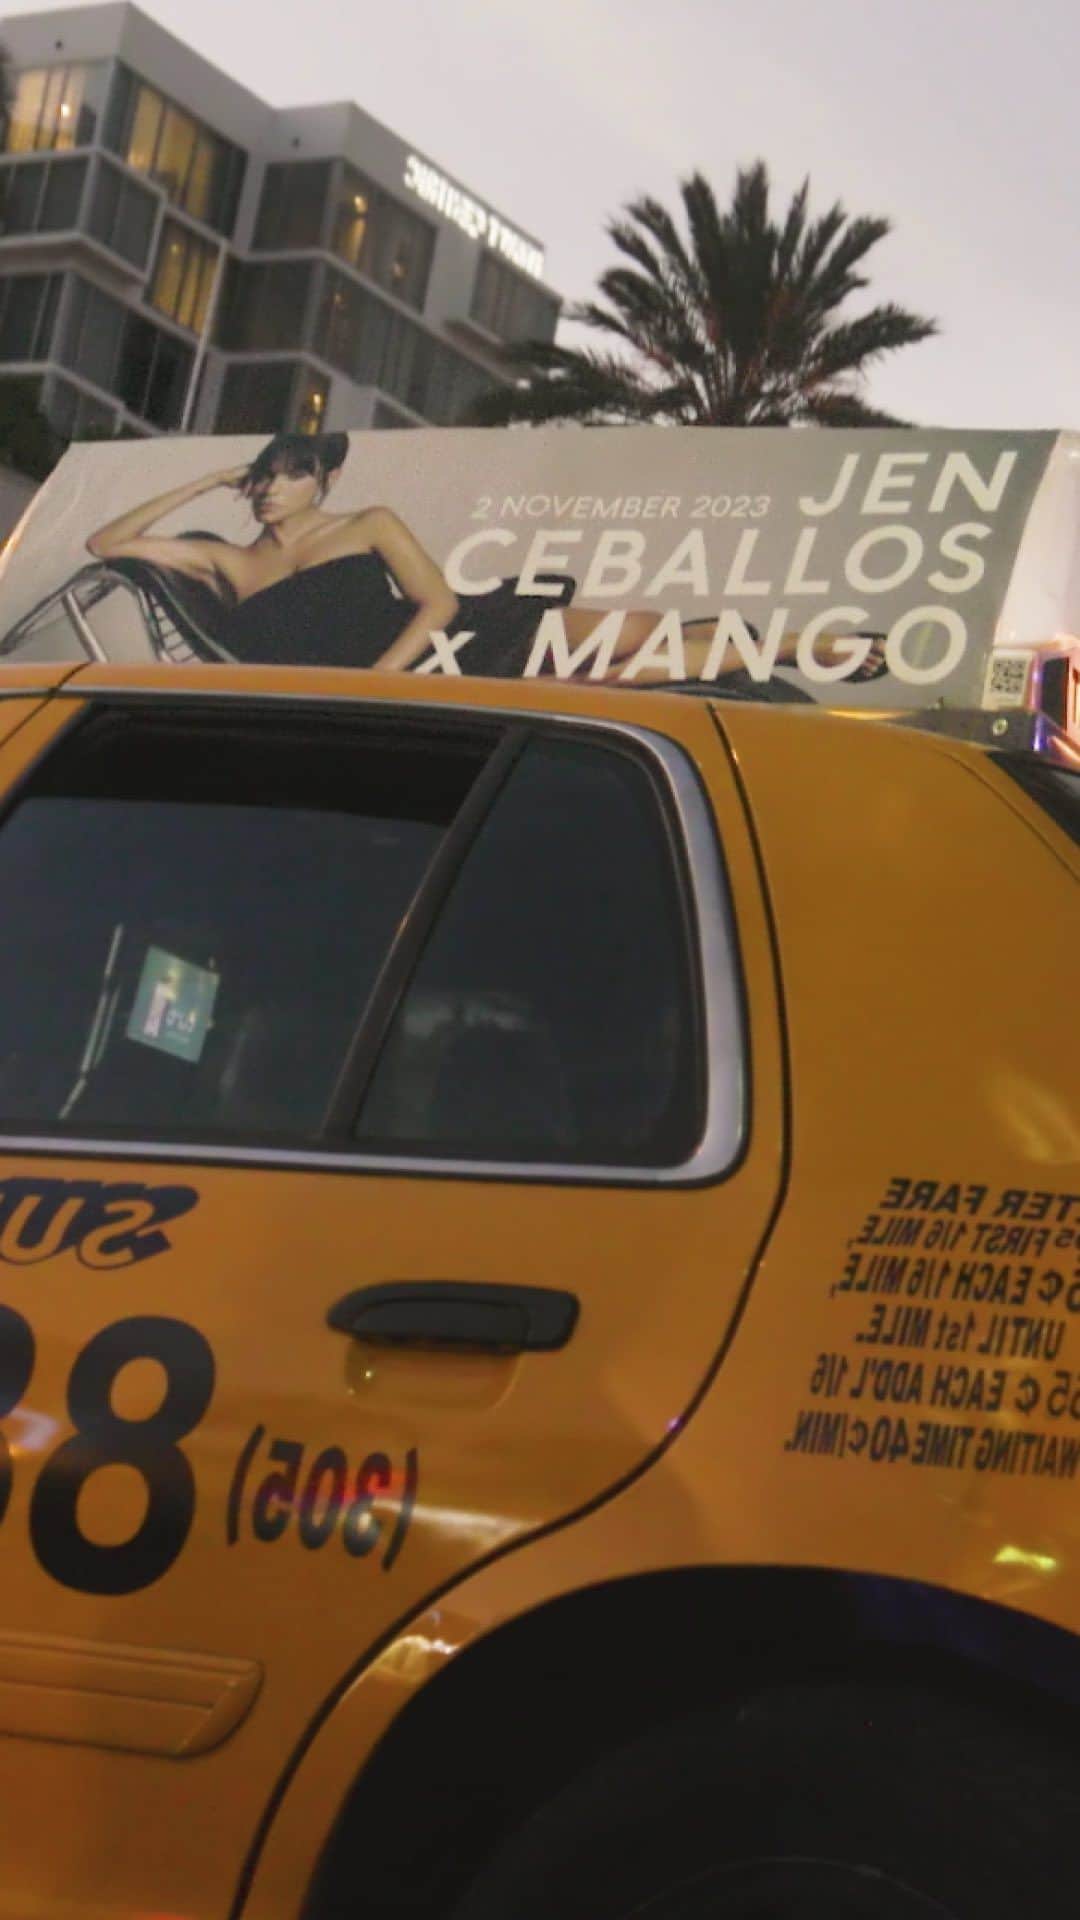 MANGOのインスタグラム：「Our party collection with Jen Ceballos is arriving at its destination 🚖 Get ready for the launch of #JenCeballosxMango on 2 November.」